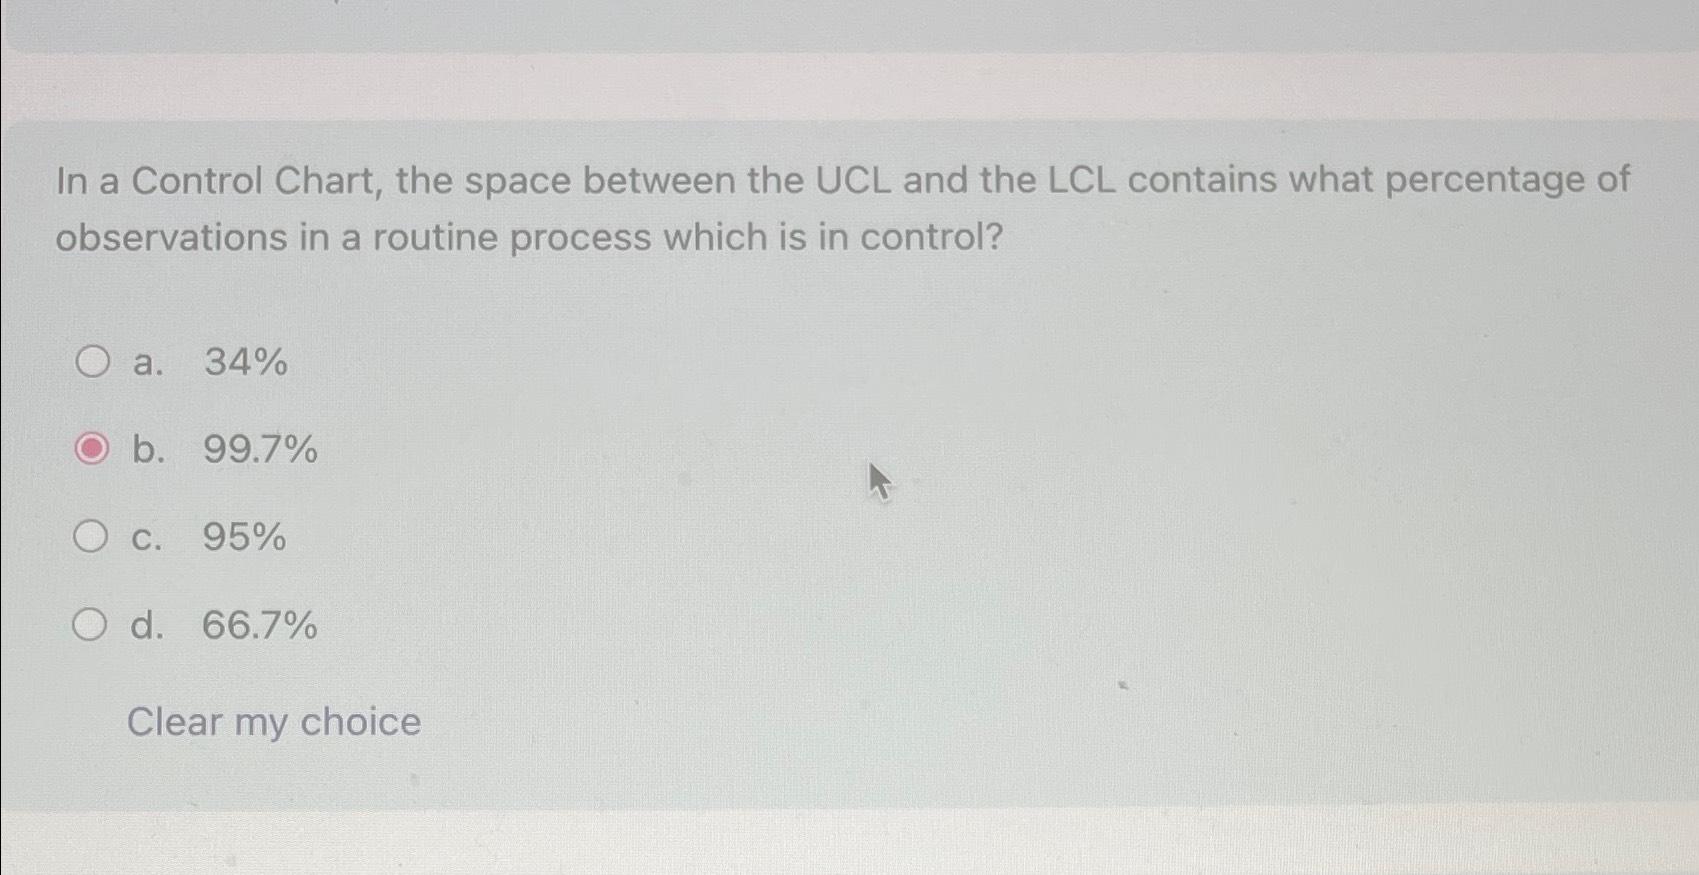 In a Control Chart, the space between the UCL and the LCL contains what percentage of observations in a